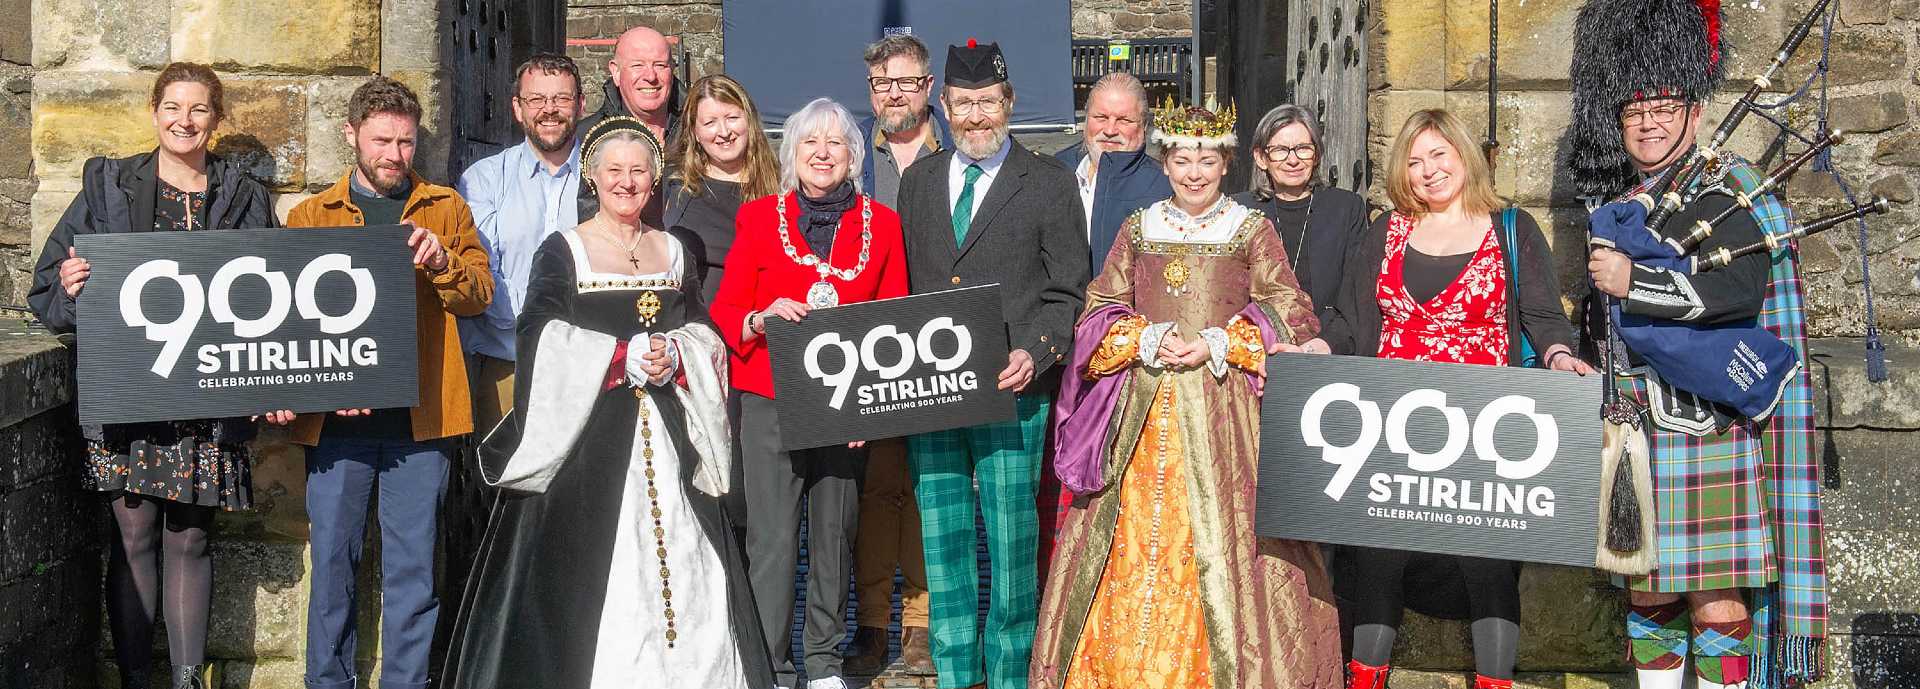 A group photo of representatives from all the partners involved in the Stirling 900n celebrations including Stirling Provost, Elaine Watterson, and the current Earl of Mar; James Erskine and the King’s Hereditary Keeper of Stirling Castle; outside the Stirling Castle gates.